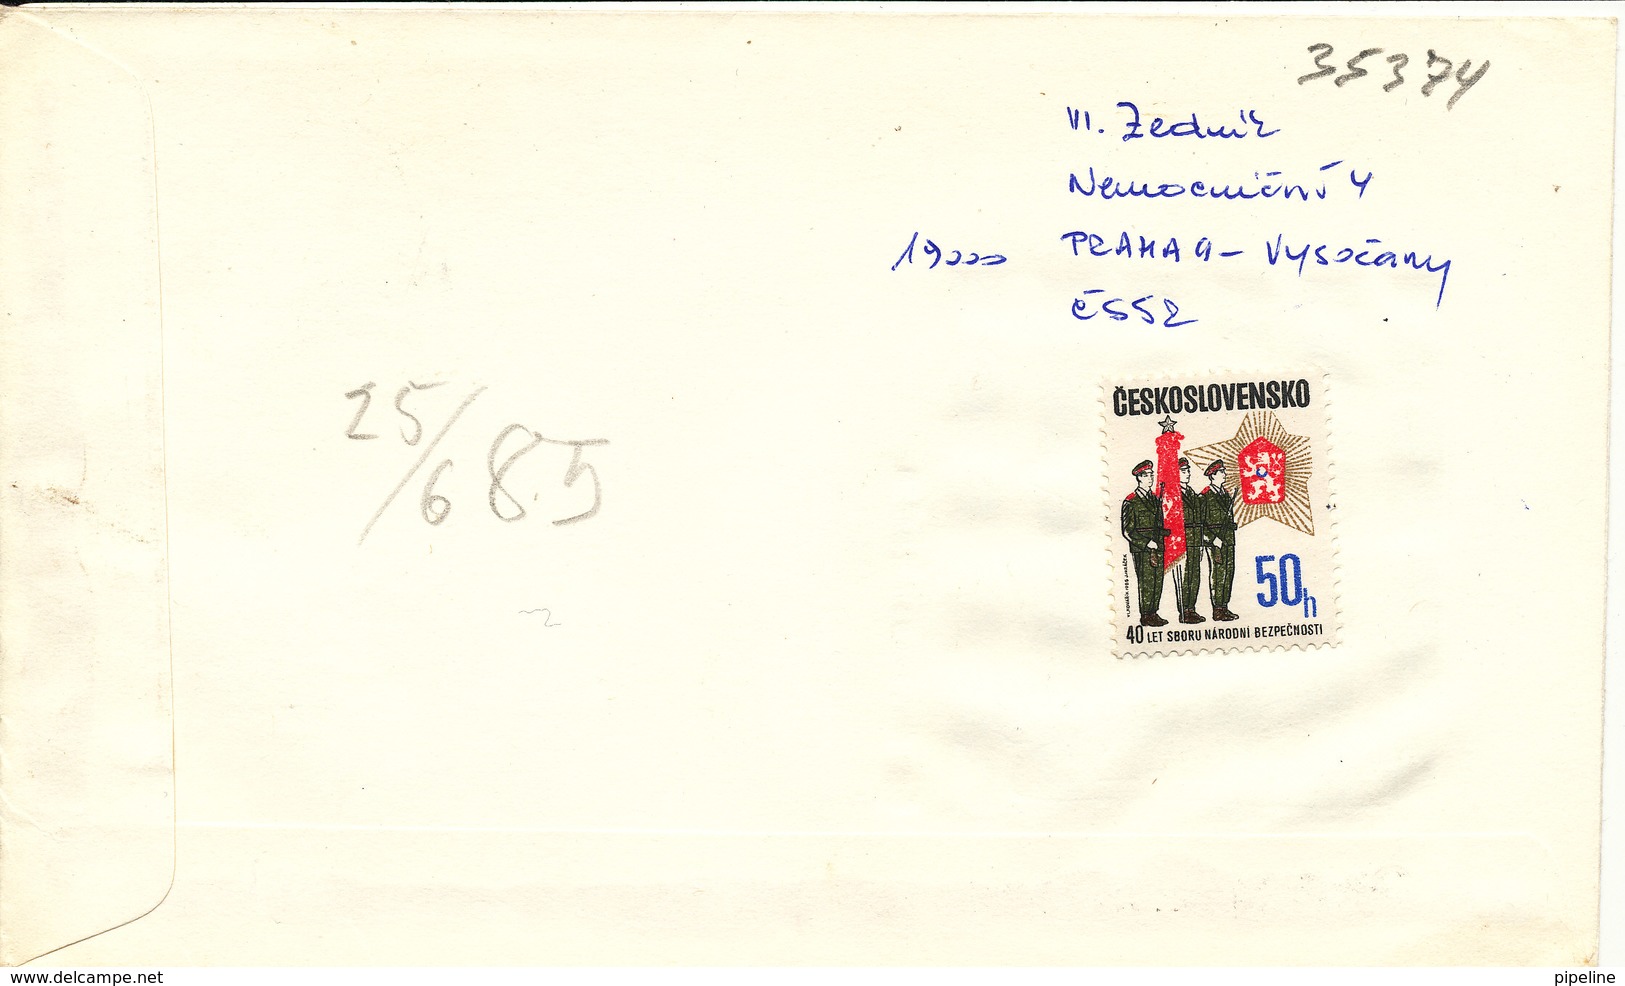 Czechoslovakia FDC 4-6-1985 Josef Capek In Pair With Cachet Uprated On The Backside Of The Cover And Sent To Denmark - FDC